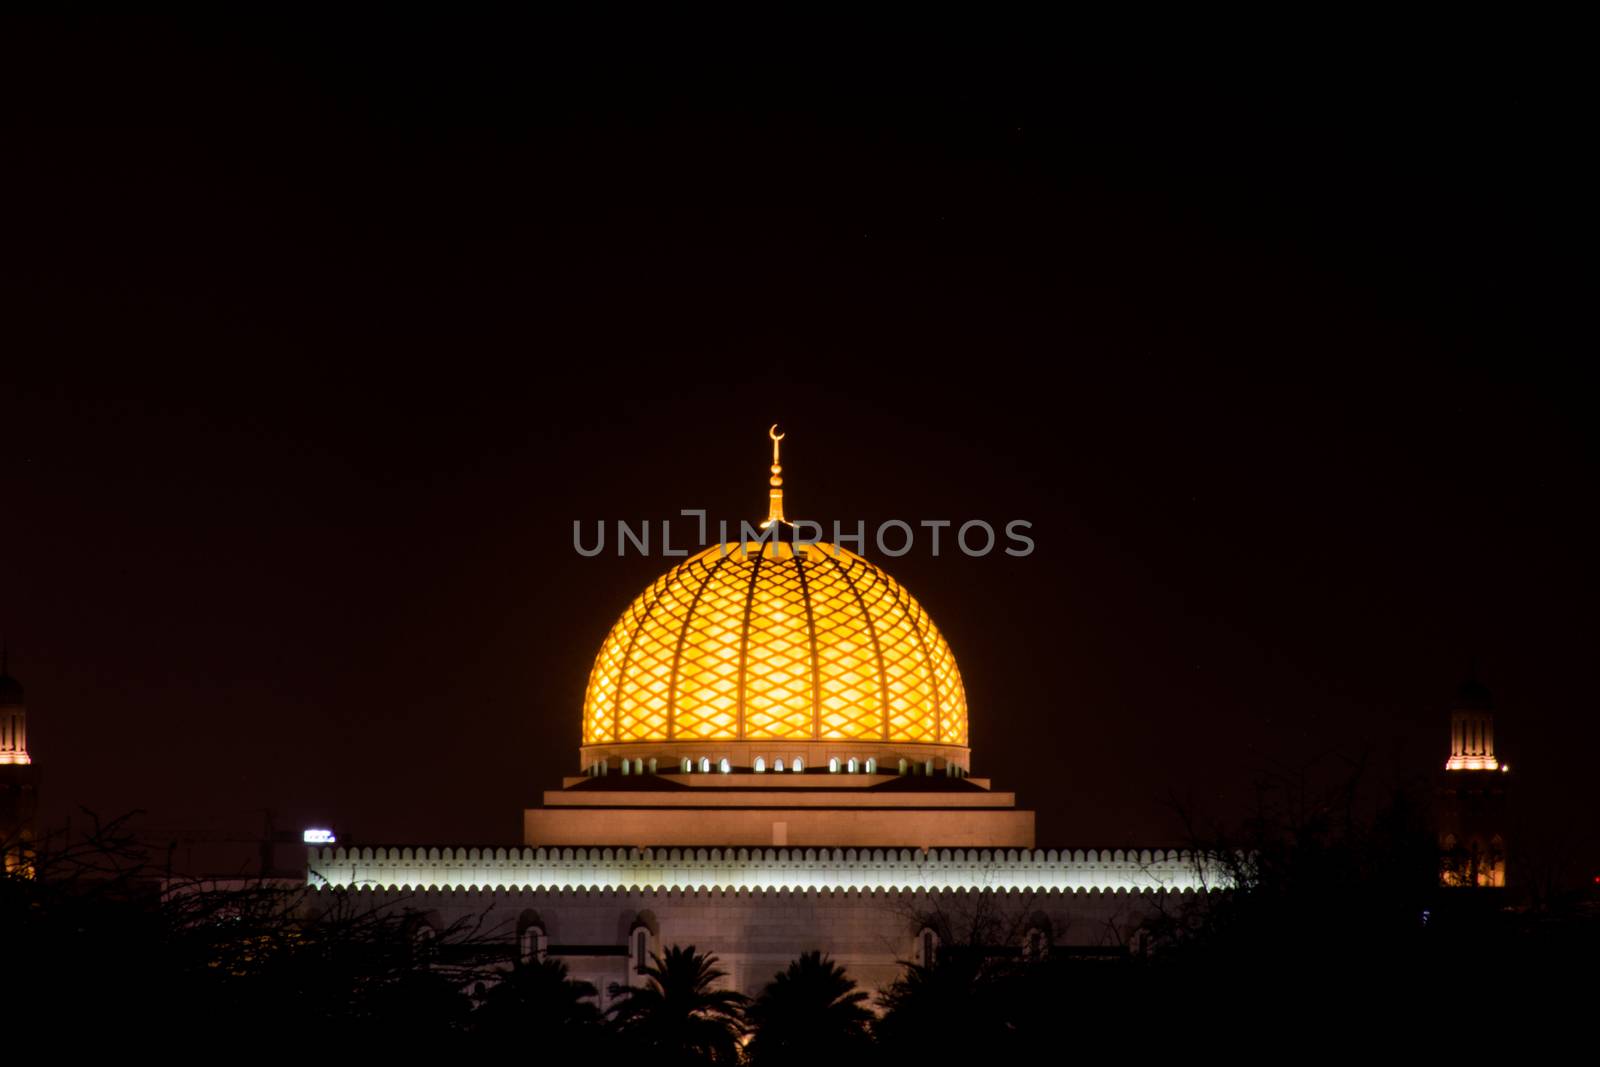 Glowing center dome of an Islamic mosque Sultan Qaboos Grand Mos by kingmaphotos